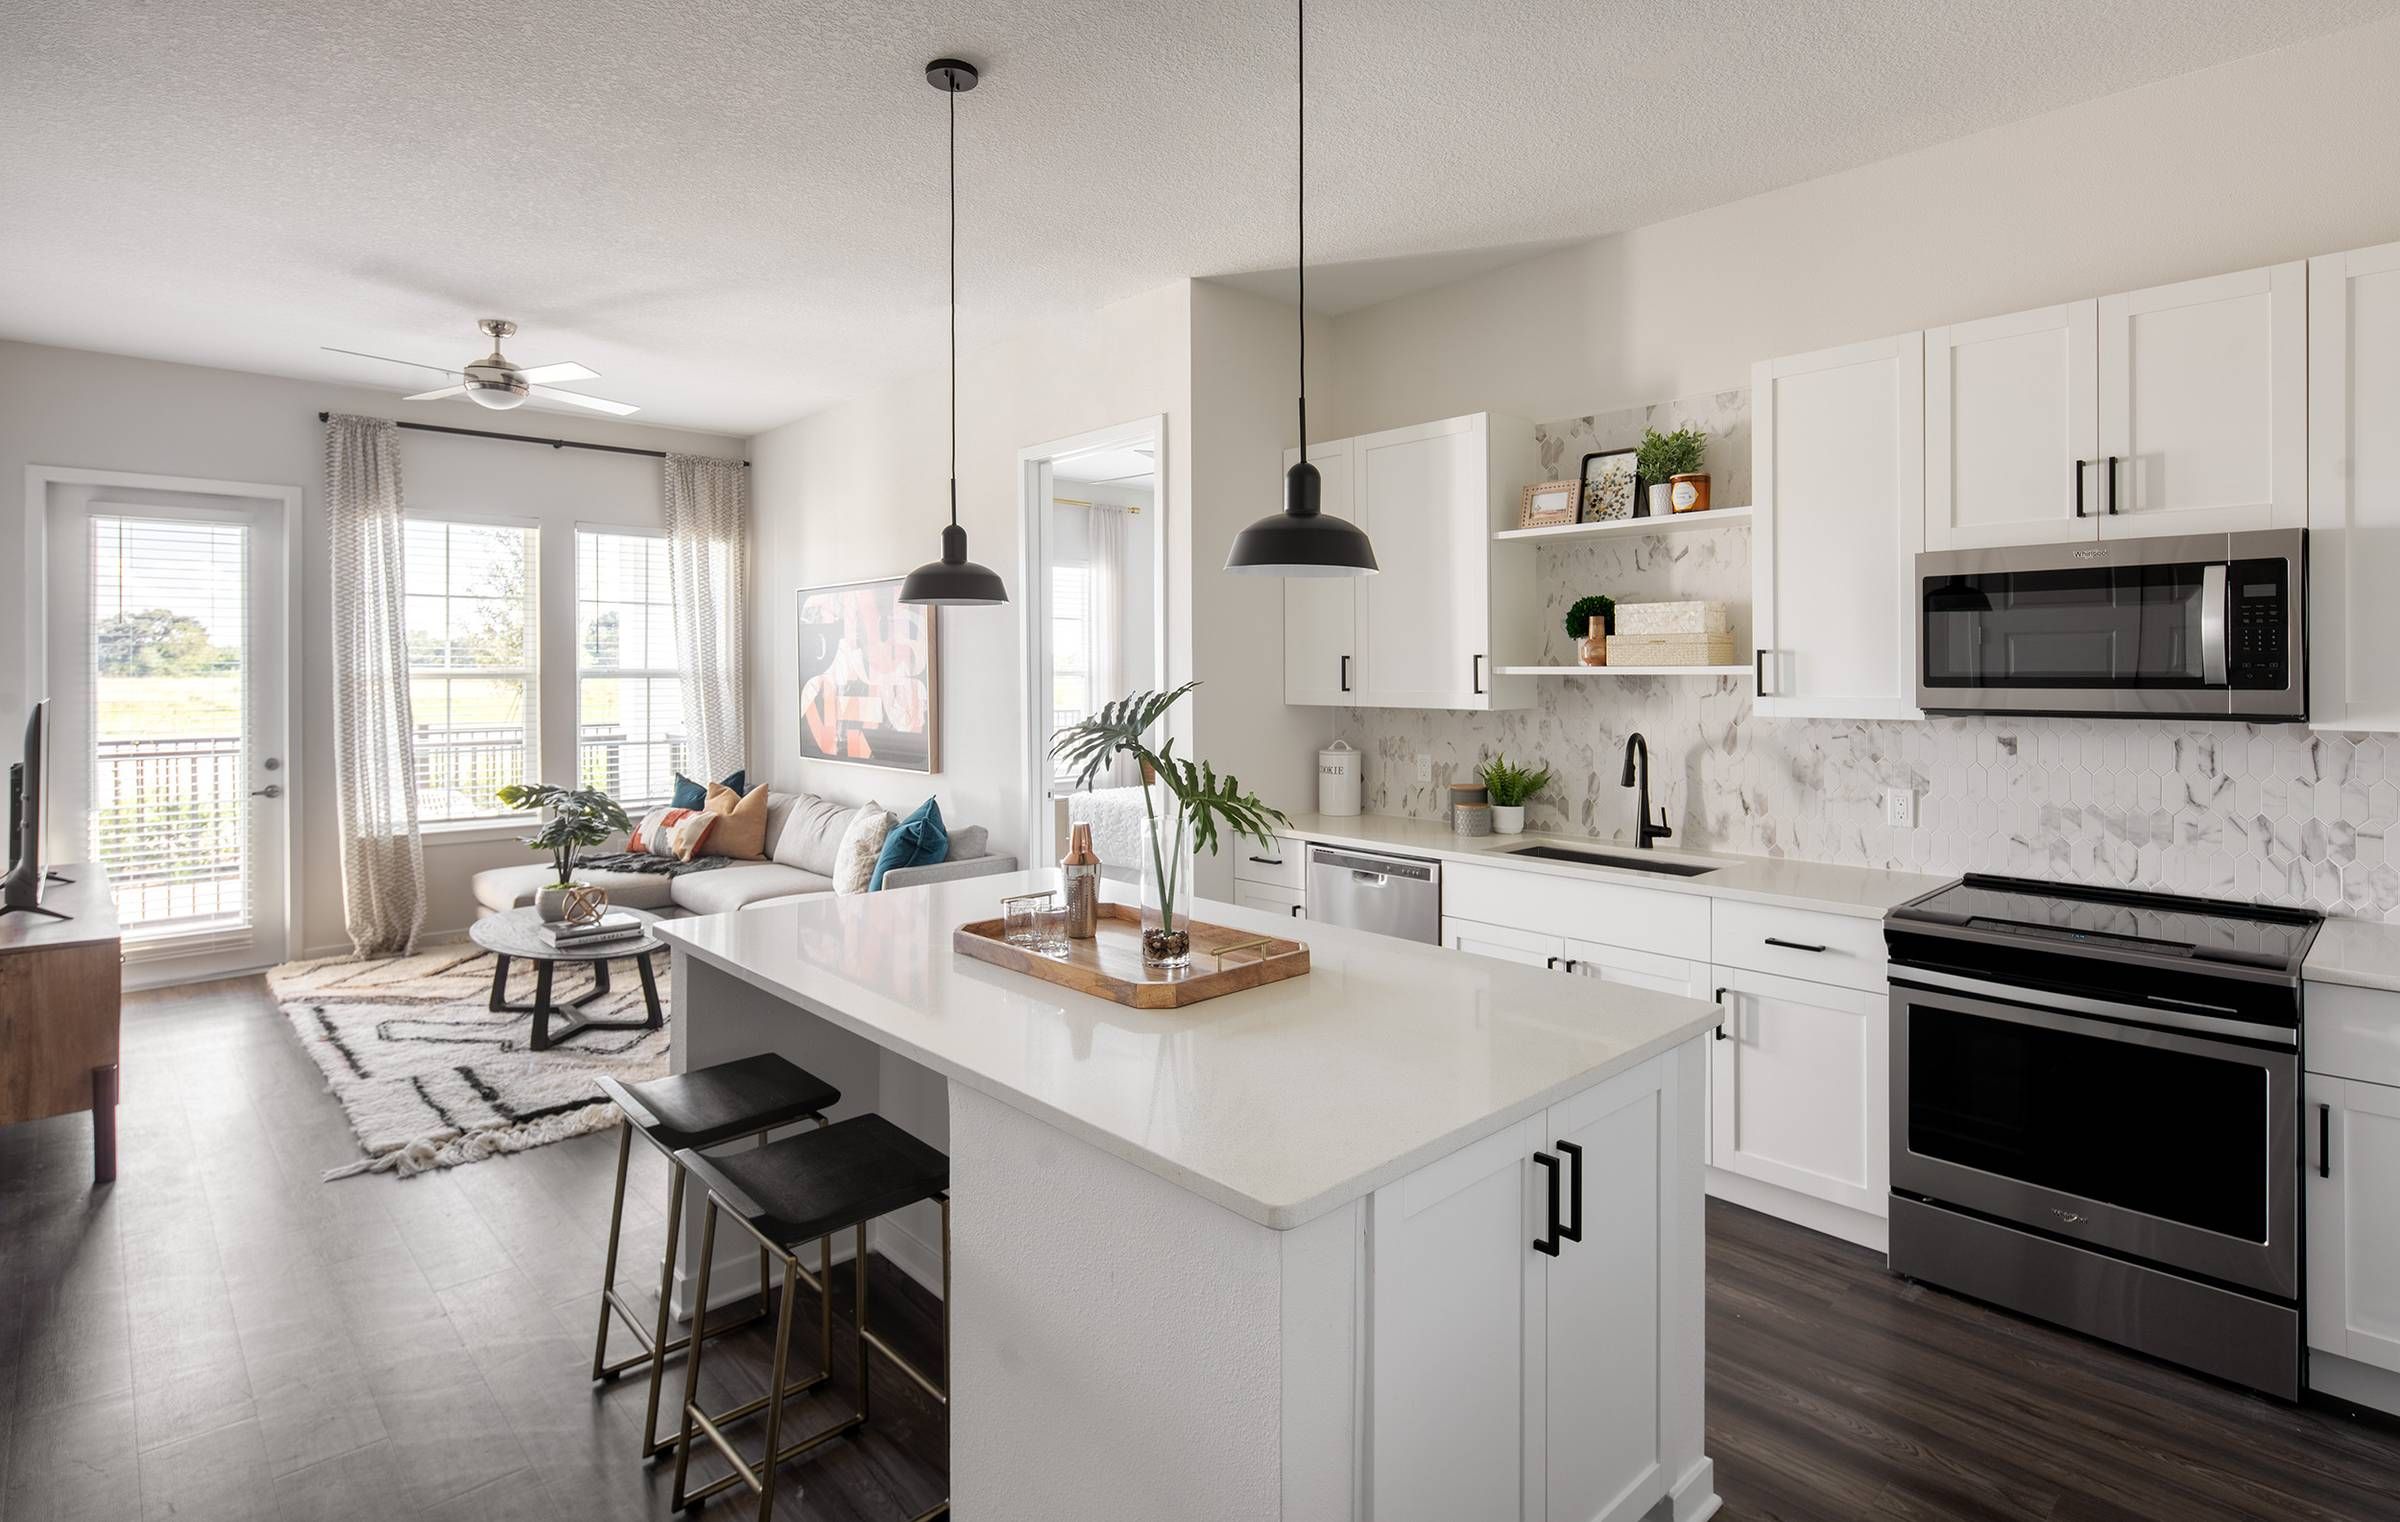 Alta Winter Garden apartment's open-concept two-bedroom model showcasing a kitchen with white cabinetry and marble backsplash, leading into a cozy living area with a sectional sofa and balcony access.